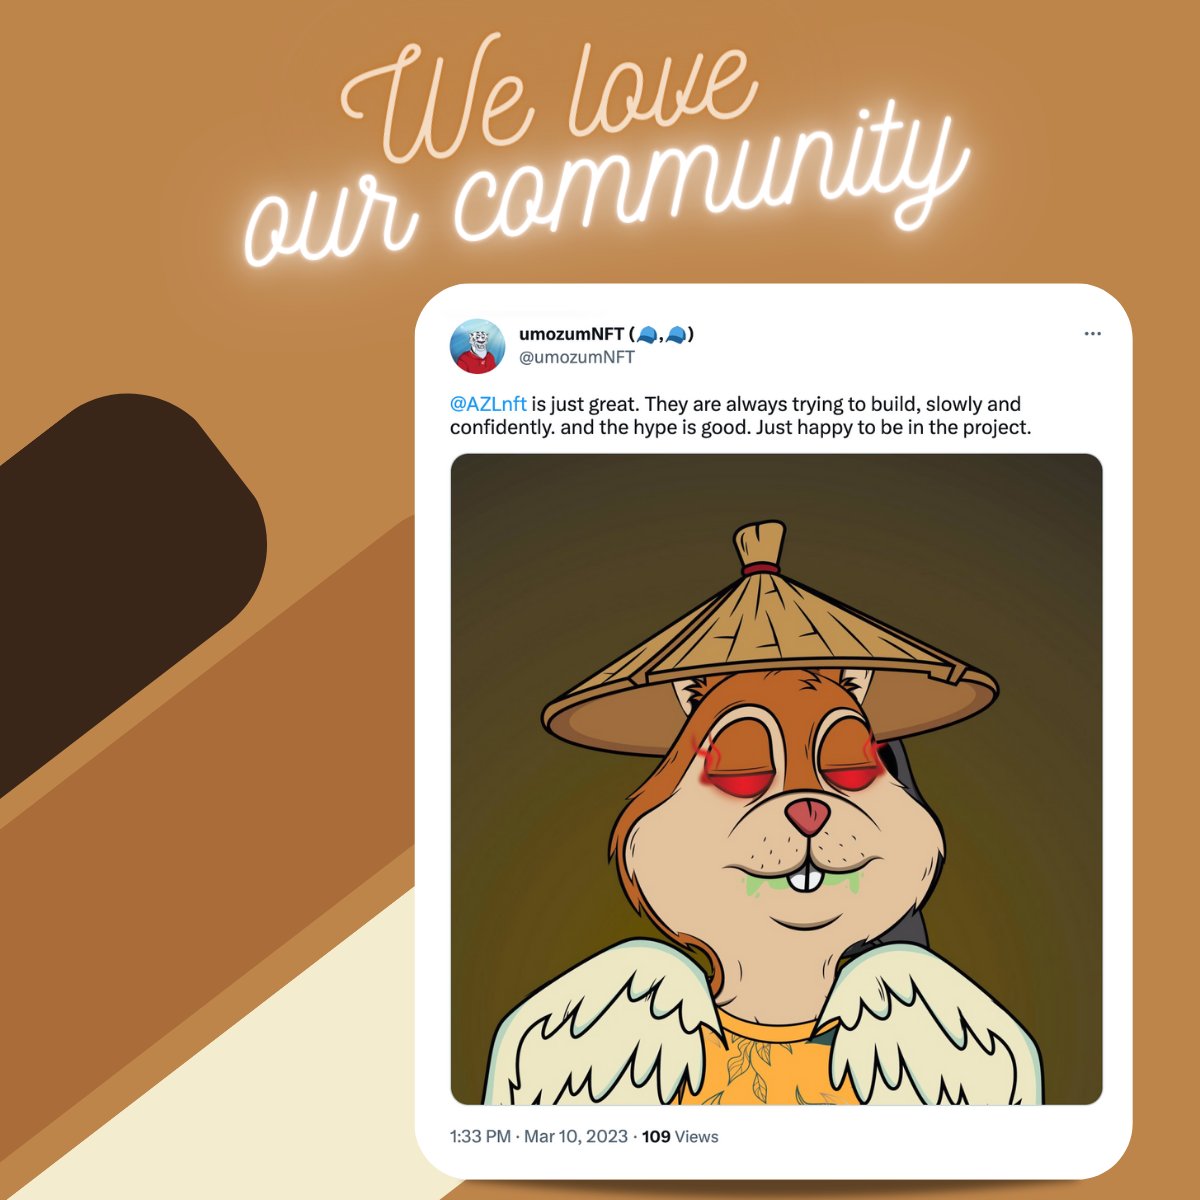 Big thanks to the amazing N01zet community for their unwavering support in creating a world of #sharedvalue through #tokenization!  
Join us on Discord to be part of the movement towards a more inclusive and equitable world! 🚀✨ #communitylove discord.gg/UdSrPHCZ